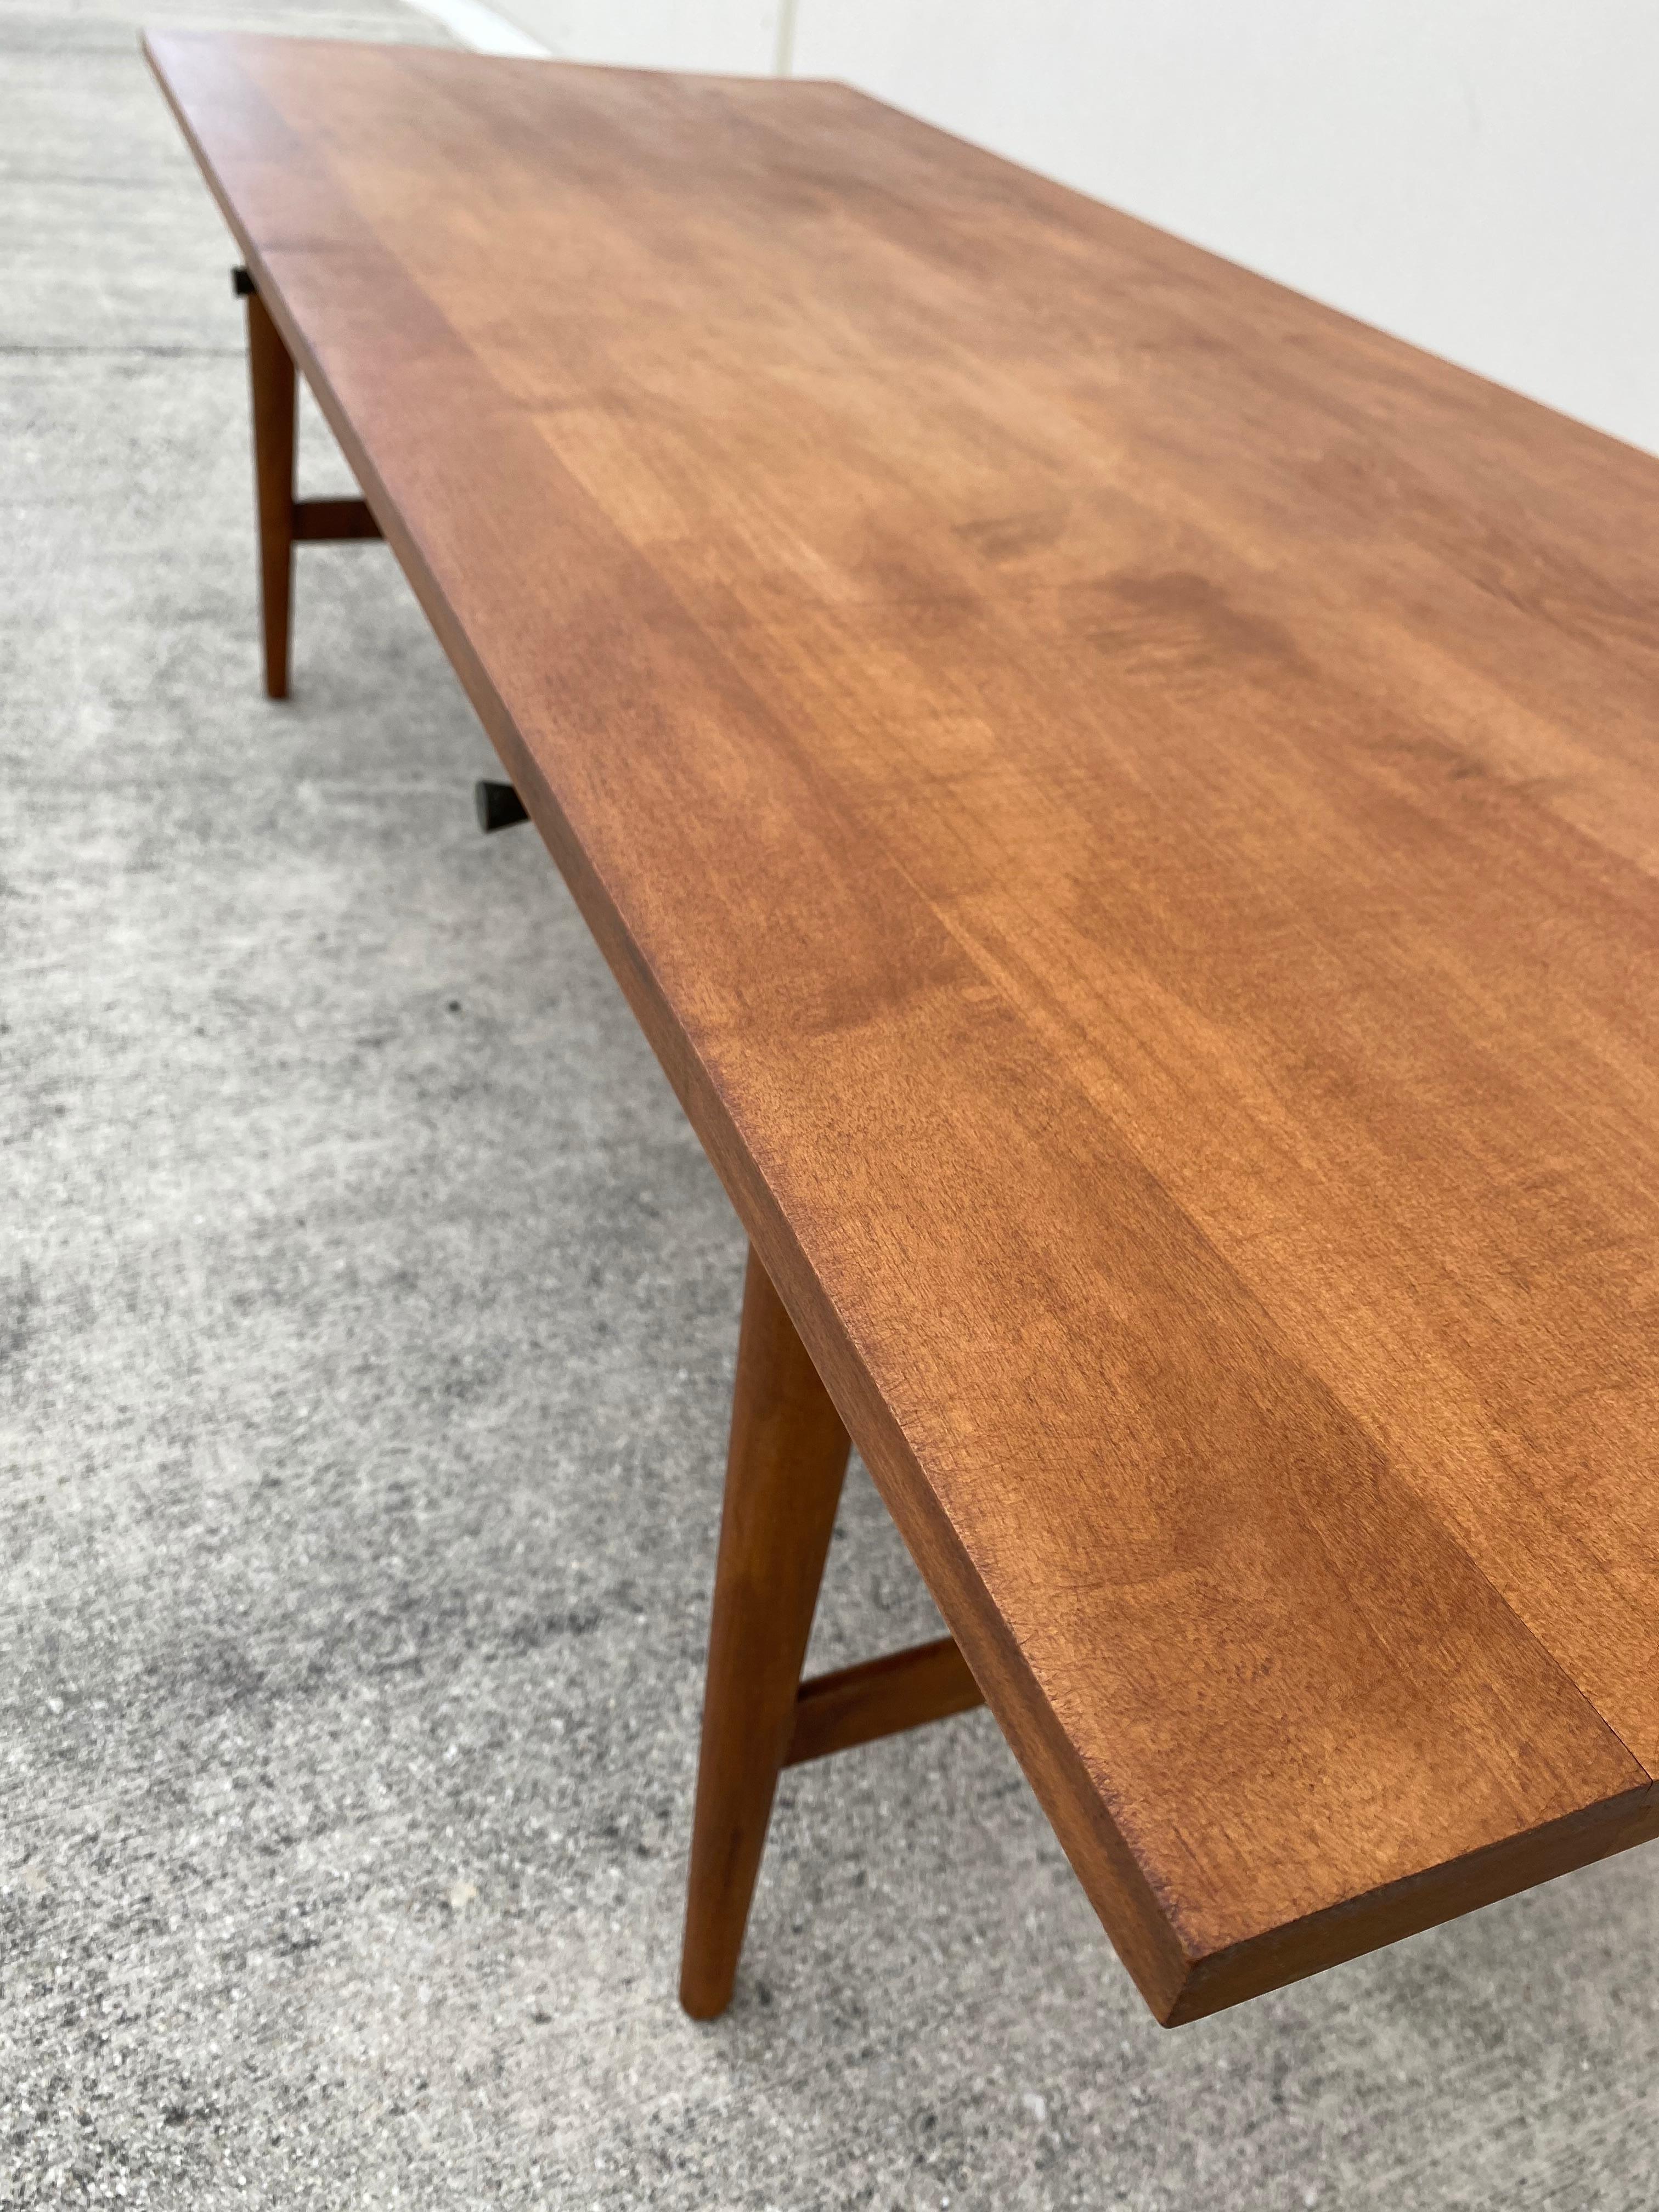 Beautiful solid wood coffee table. From the Planner Group line designed by Paul McCobb for Winchendon Furniture Company. Retains original manufacturer’s label and guaranteed authentic. Simple and elegant lines with original pulls and refinished